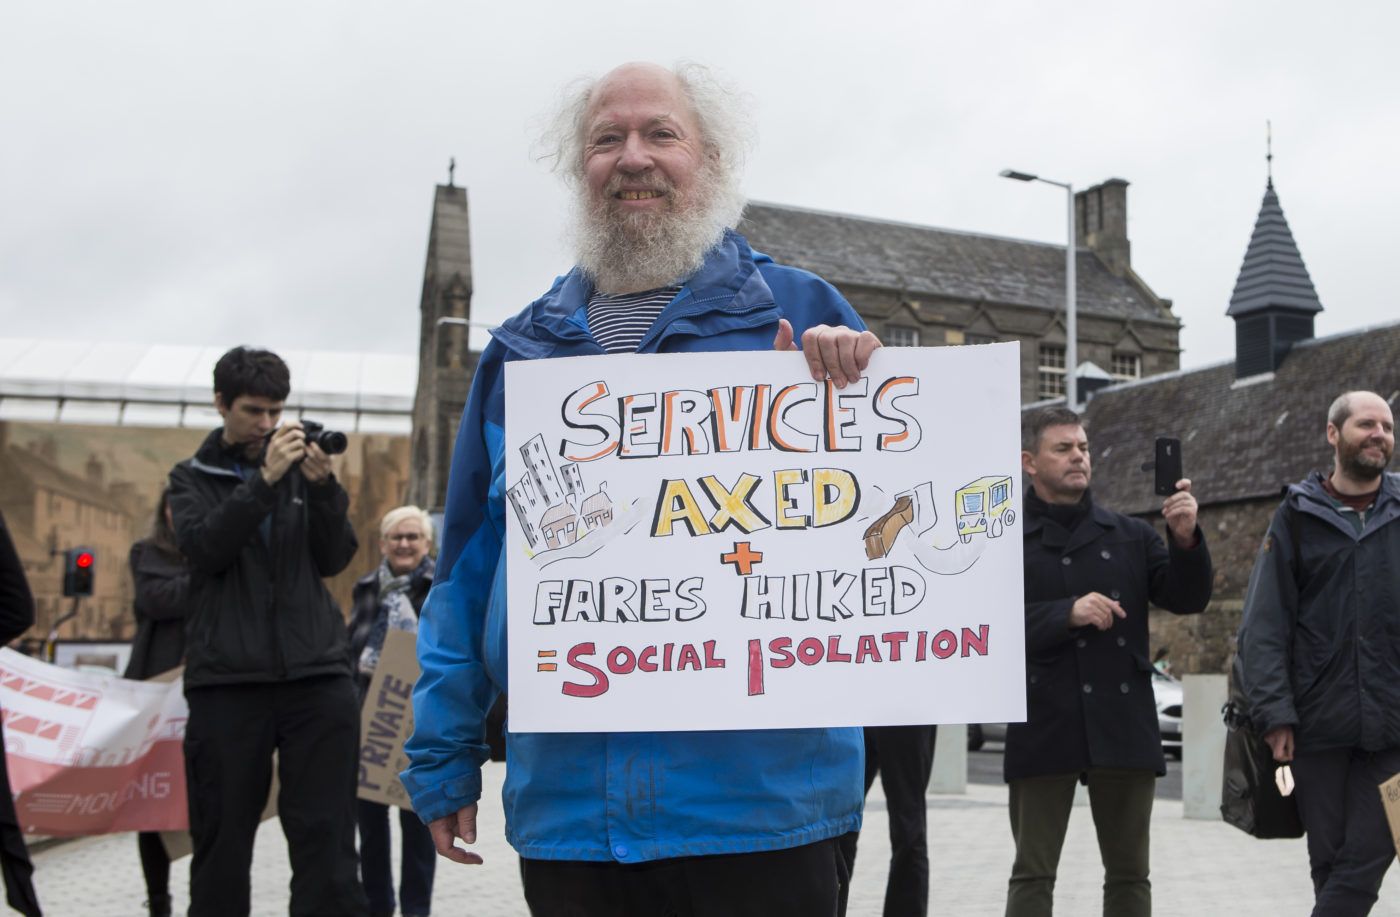 Bus protestor outside Scottish Parliament with "services axed" sign